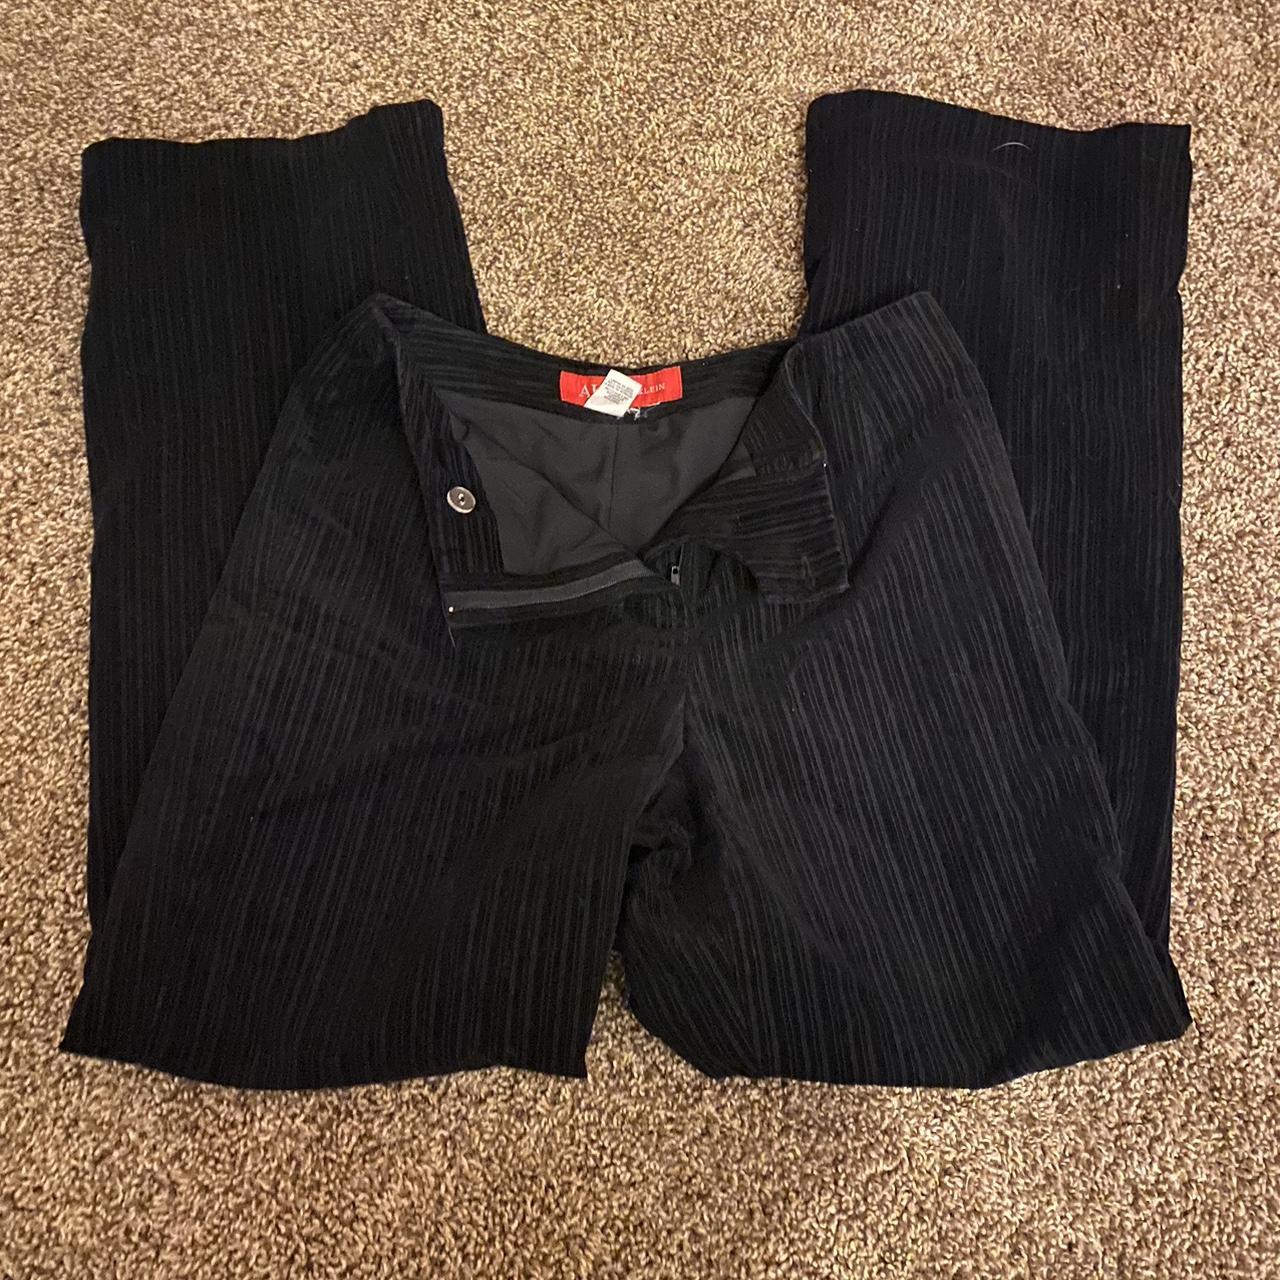 item listed by thriftsalefindz